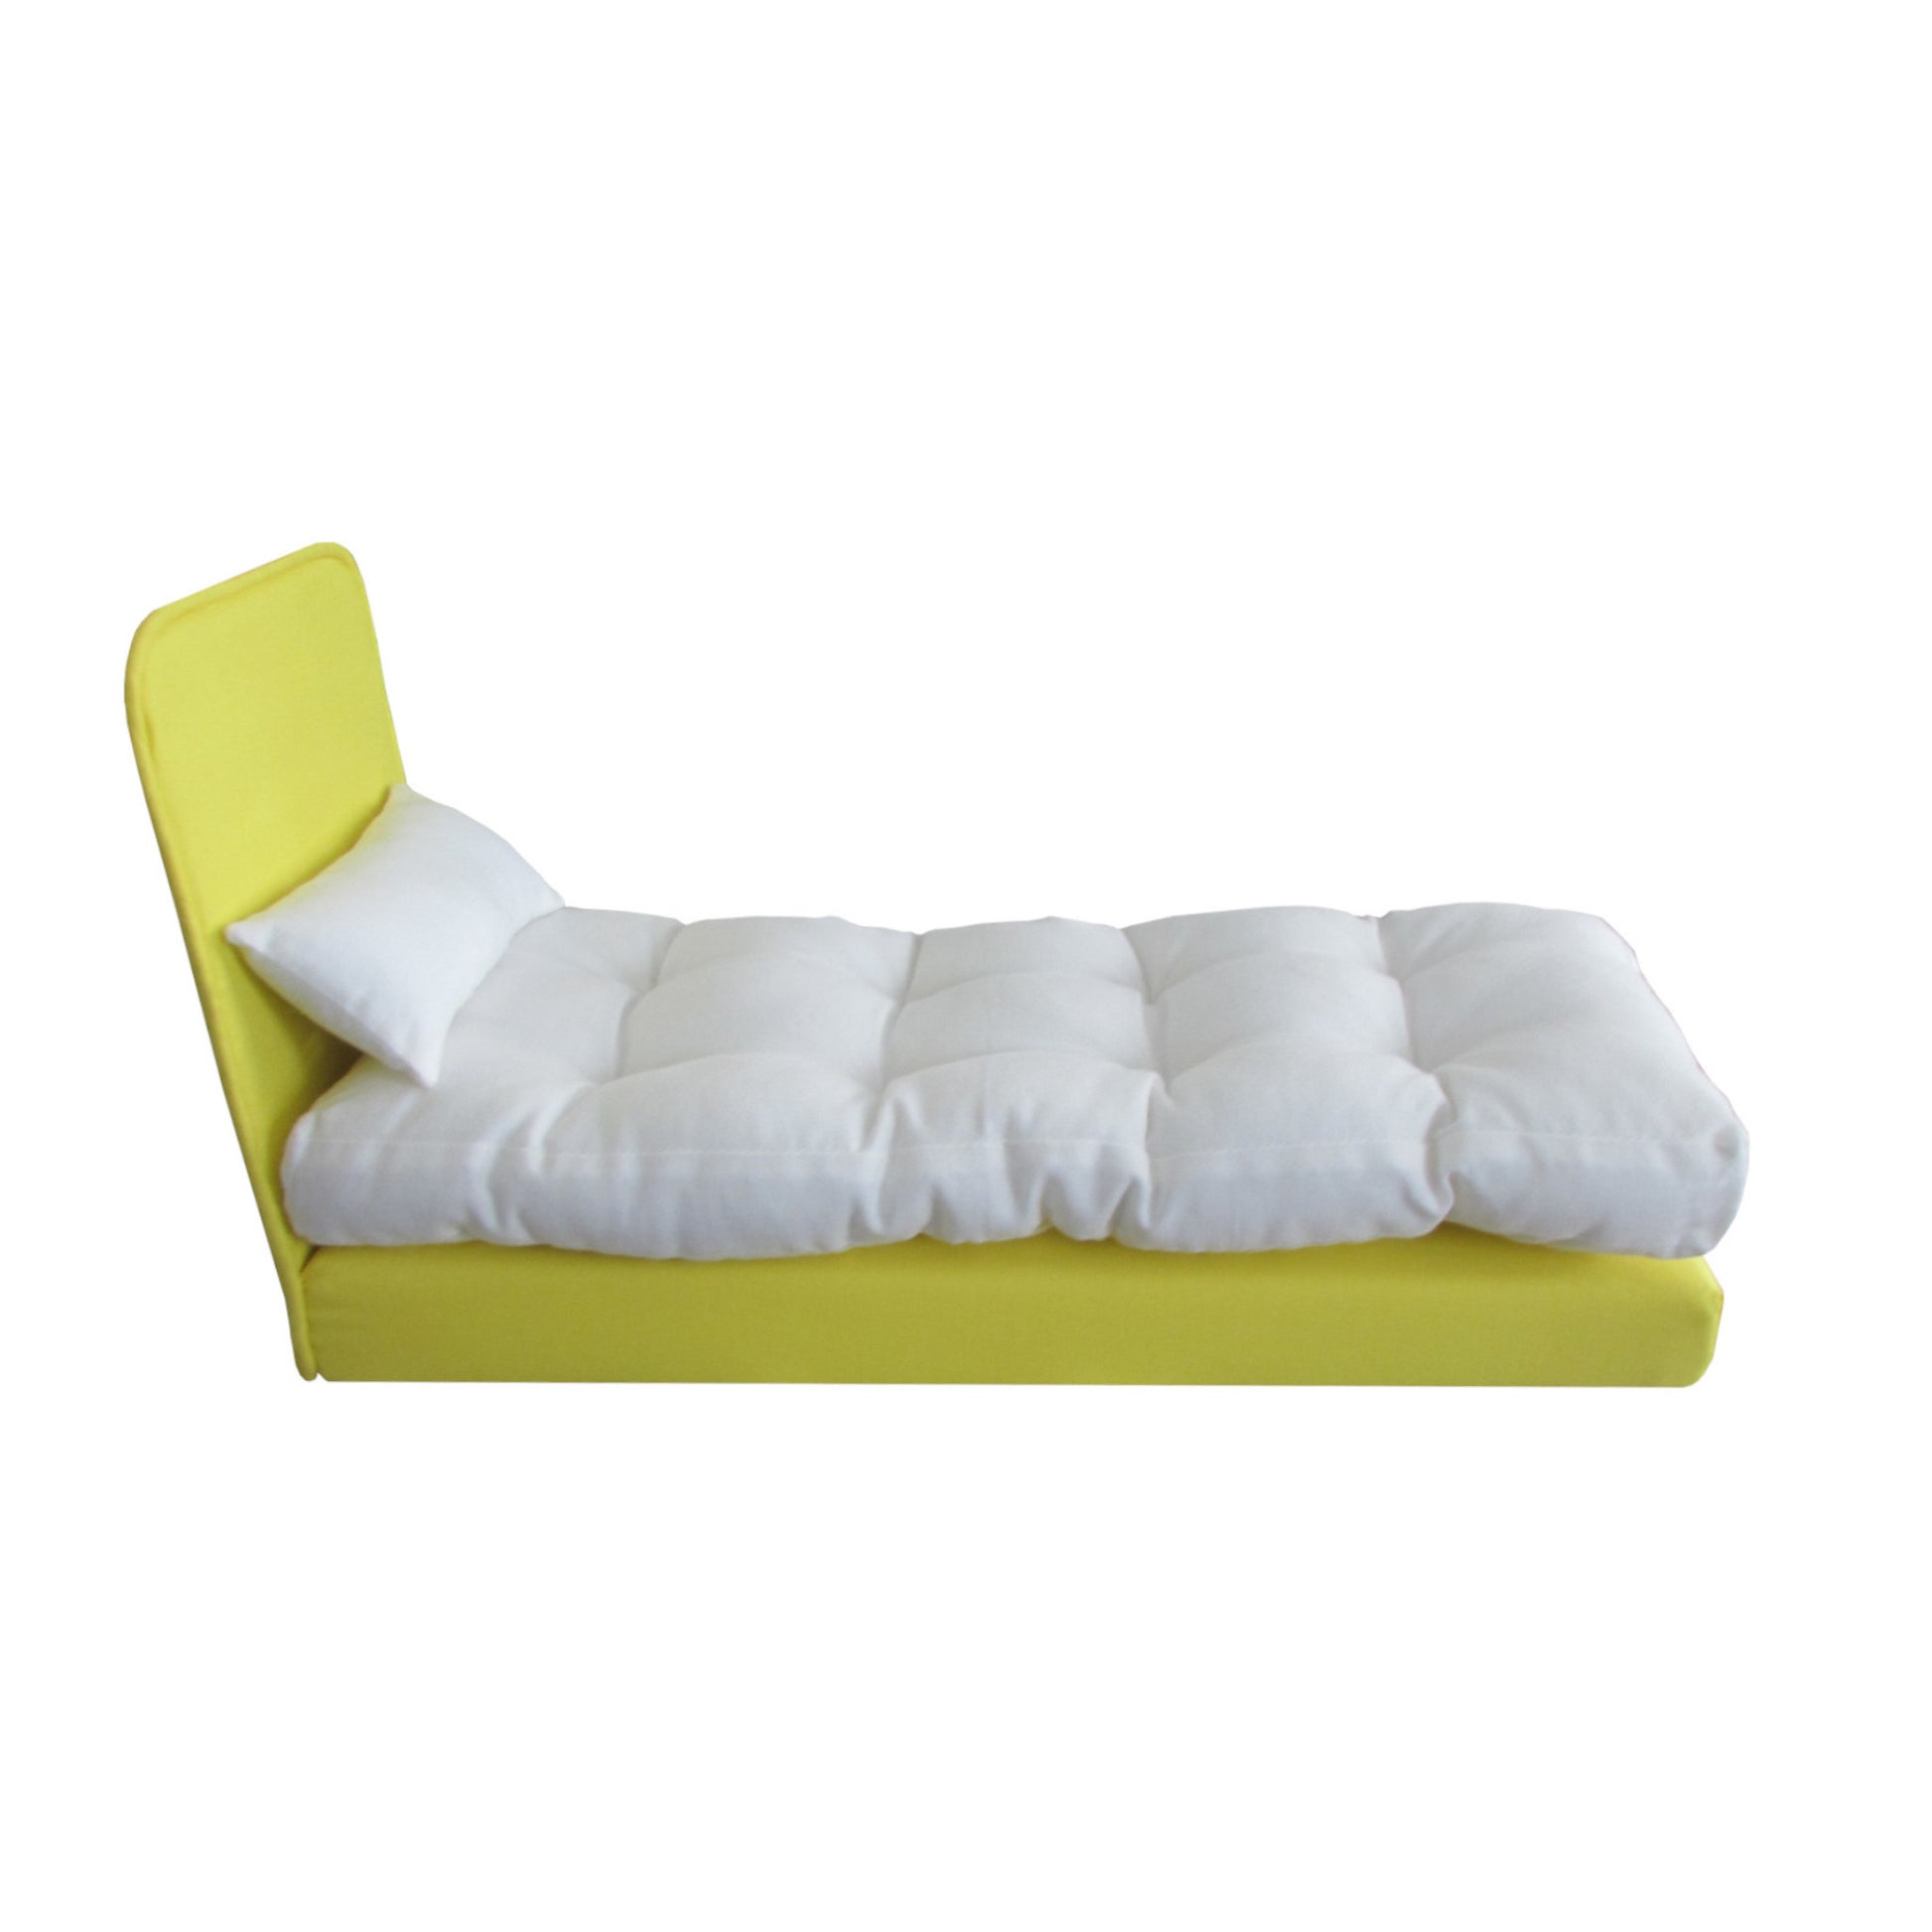 Bright Yellow Doll Bed For 11 1/2-inch and 12-inch dolls Side View